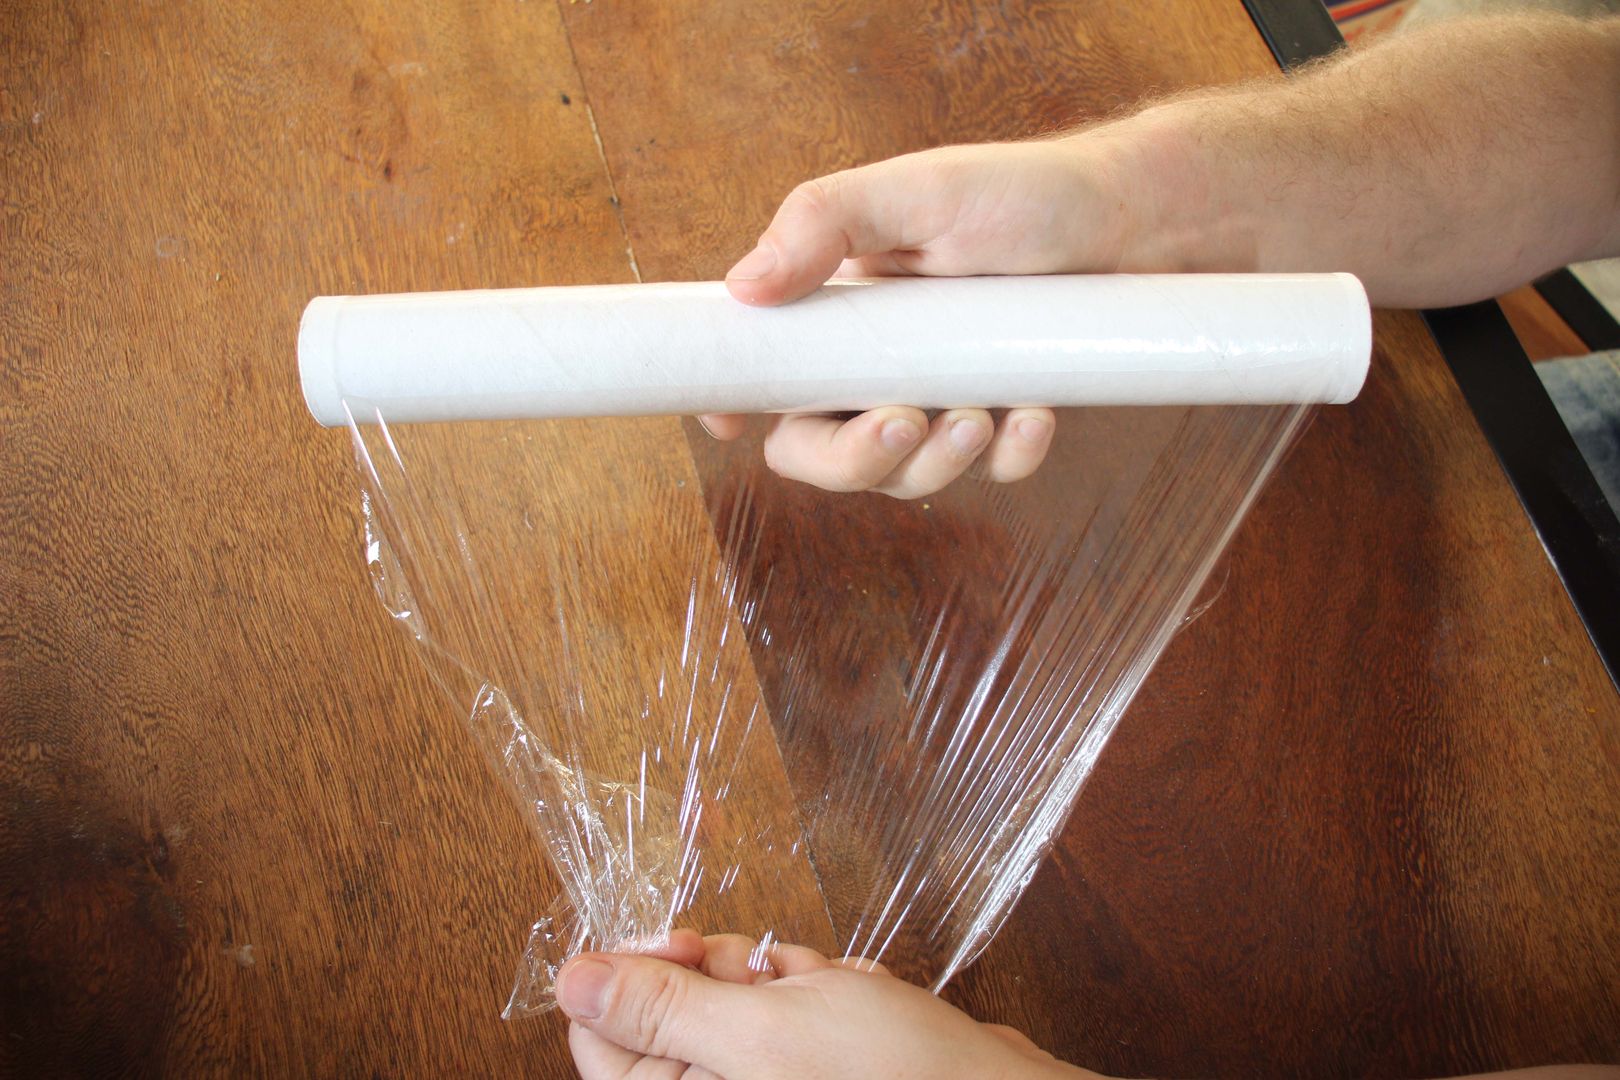 How To Find the End of Plastic Wrap Easily In 6 Steps